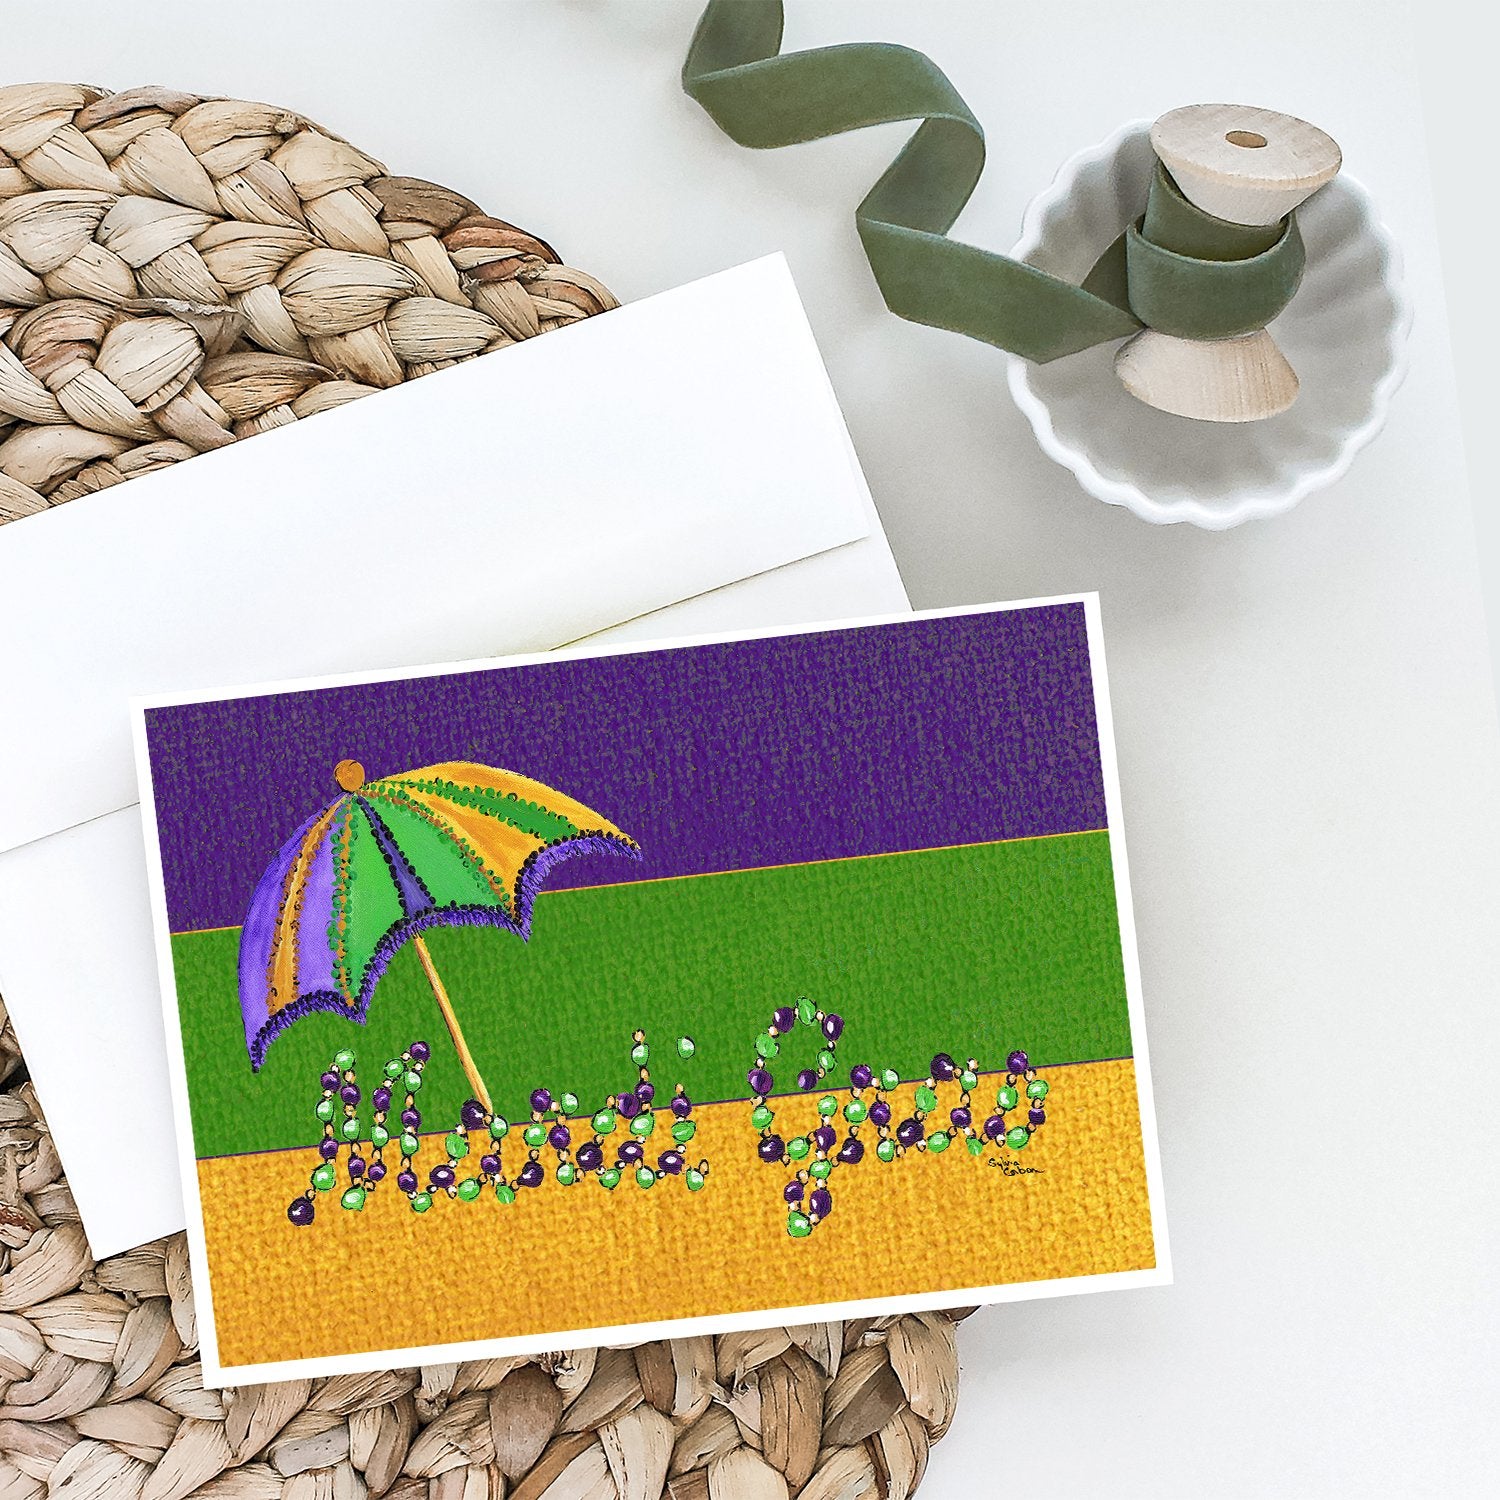 Buy this Mardi Gras Beads and Umbrella Greeting Cards and Envelopes Pack of 8